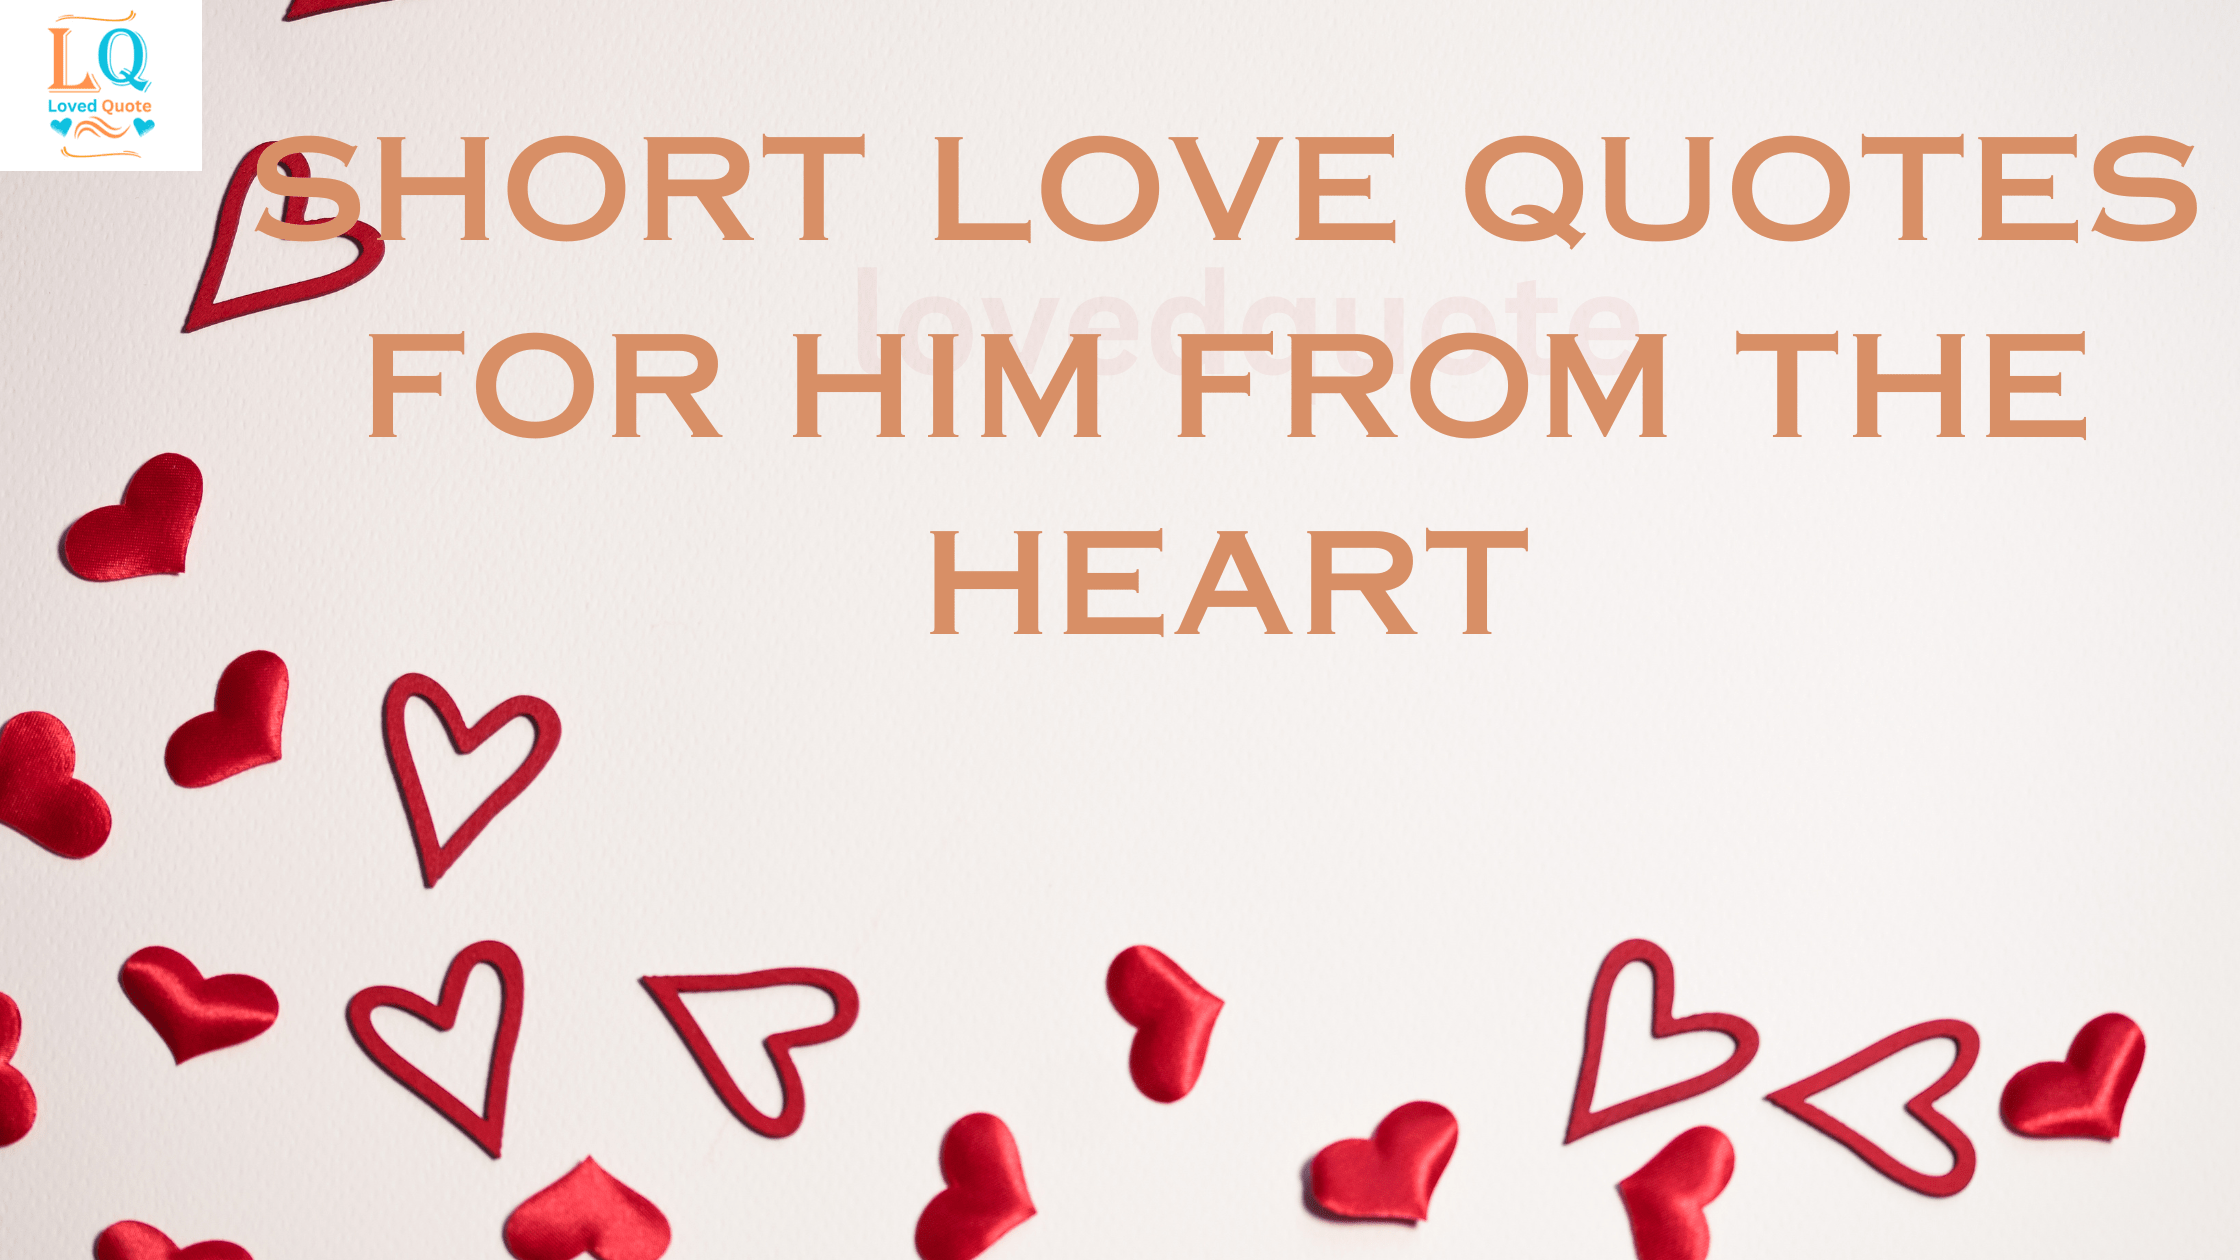 Short Love Quotes for Him From the Heart